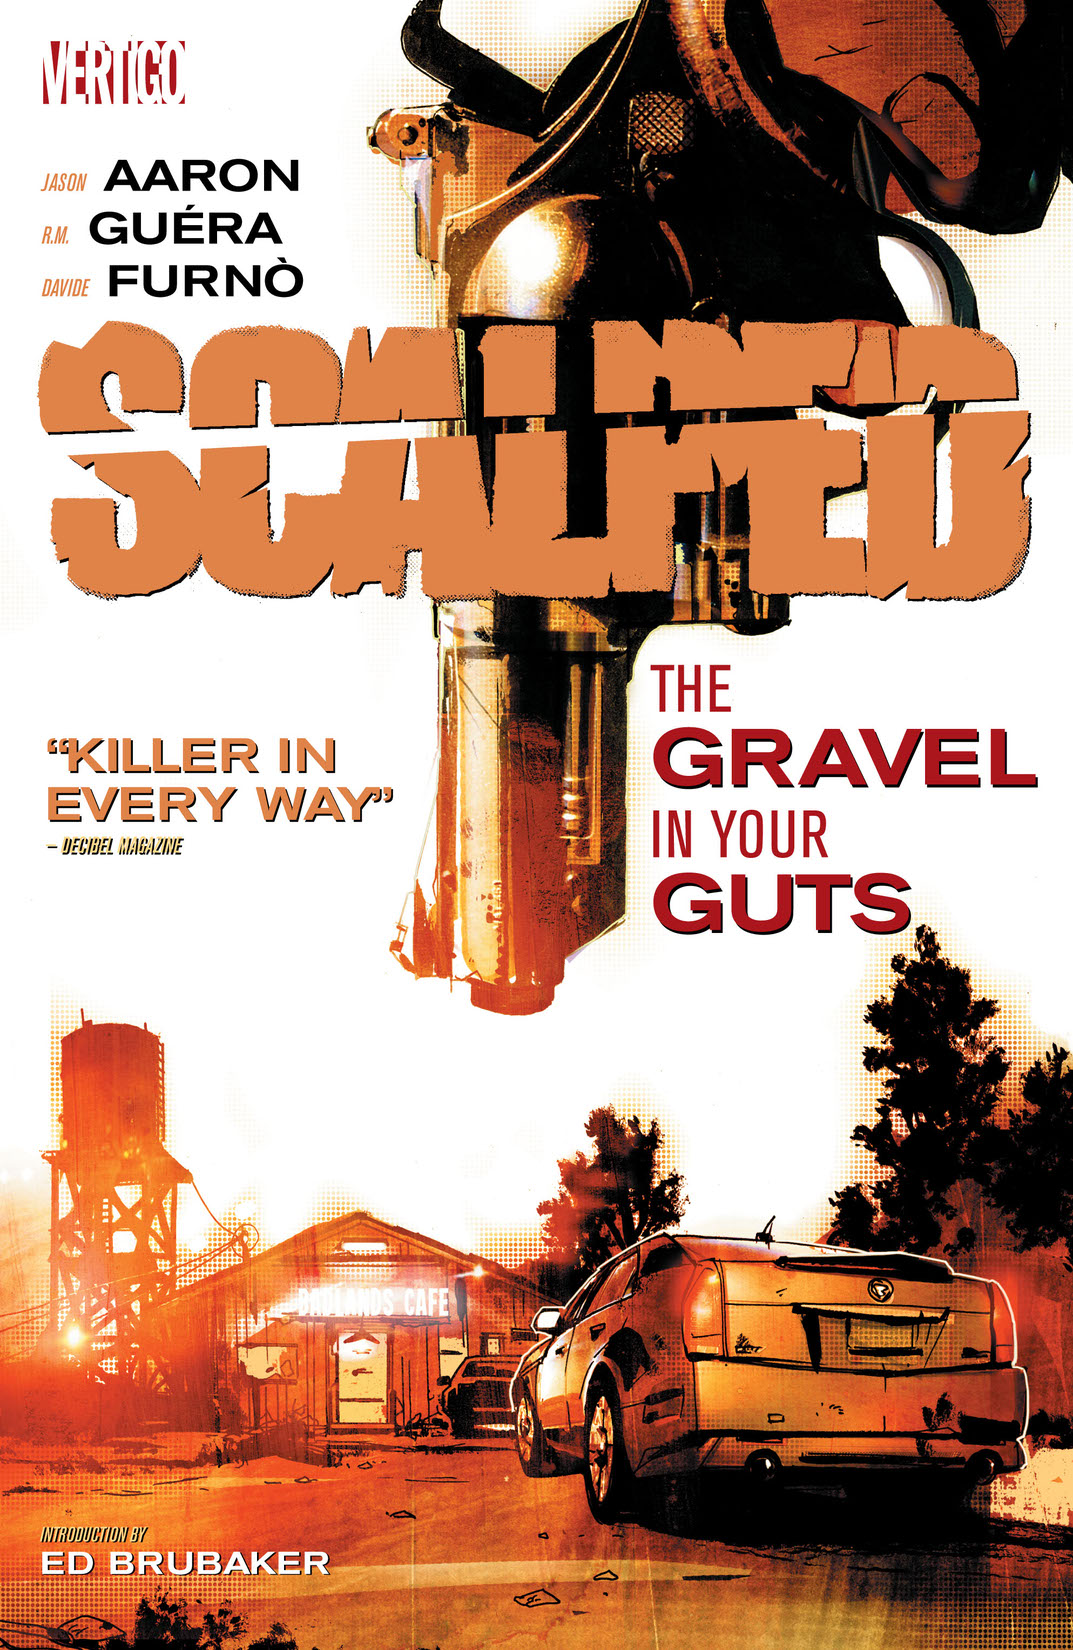 Scalped Vol. 4: The Gravel in Your Guts preview images